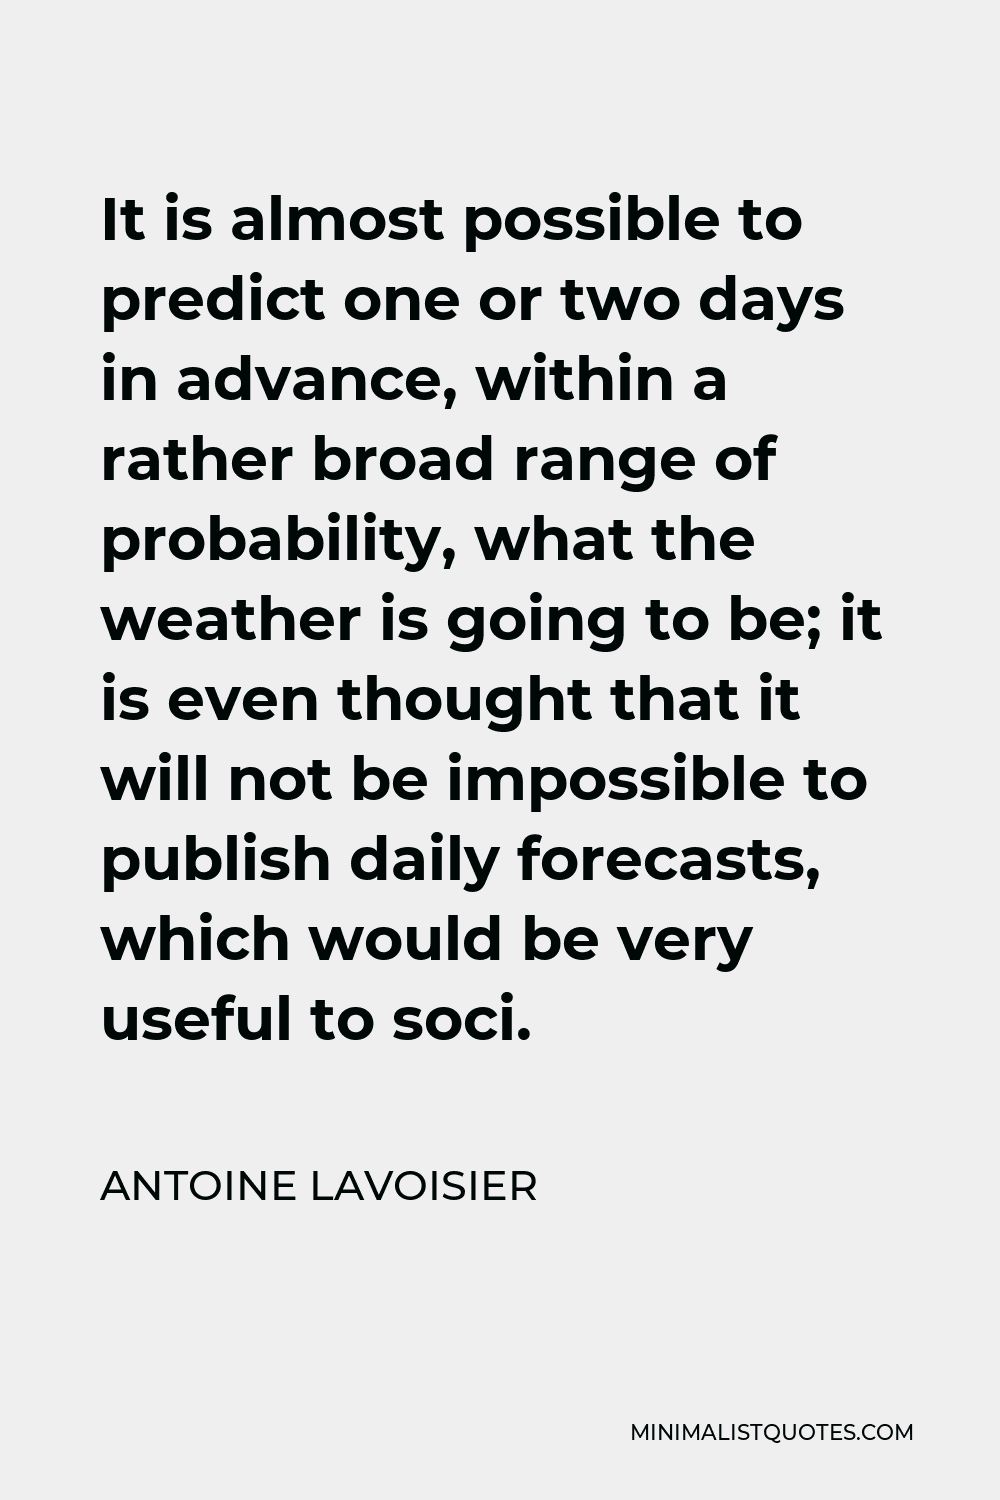 Antoine Lavoisier Quote - It is almost possible to predict one or two days in advance, within a rather broad range of probability, what the weather is going to be; it is even thought that it will not be impossible to publish daily forecasts, which would be very useful to soci.